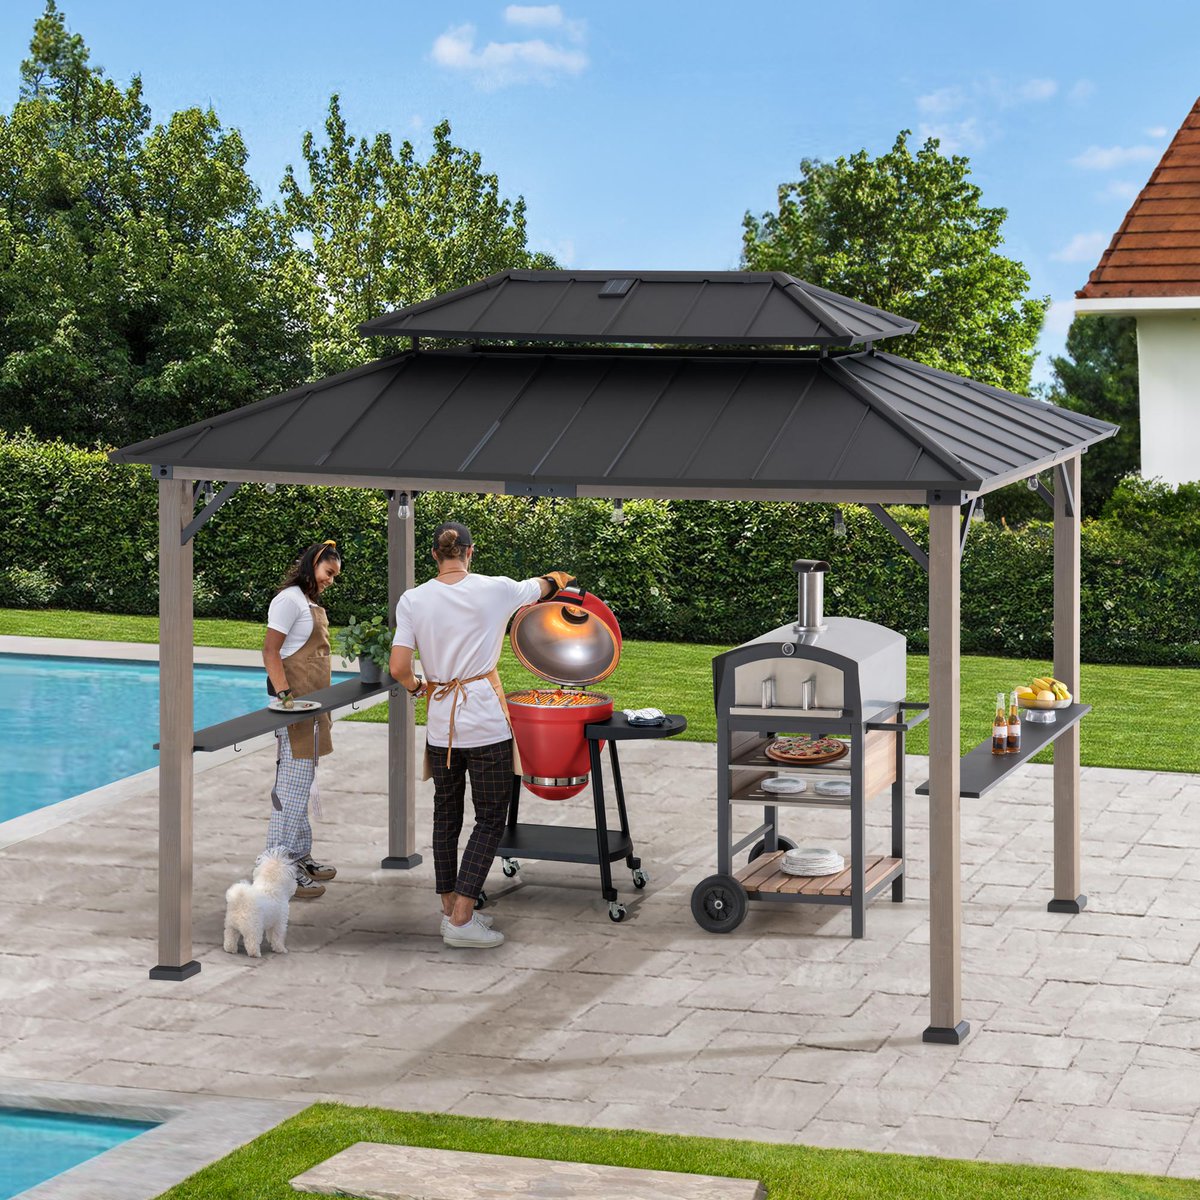 Nothing beats the sizzle of a BBQ and the laughter of friends on a weekend! Join in on the fun with our 8' X 12' Cedar Frame Grill Gazebo and Charcoal Grill (it even comes with a pizza stone!).

Order at: bit.ly/3U0KTbT |  bit.ly/49nFqkw

#Grilling #bbqlovers